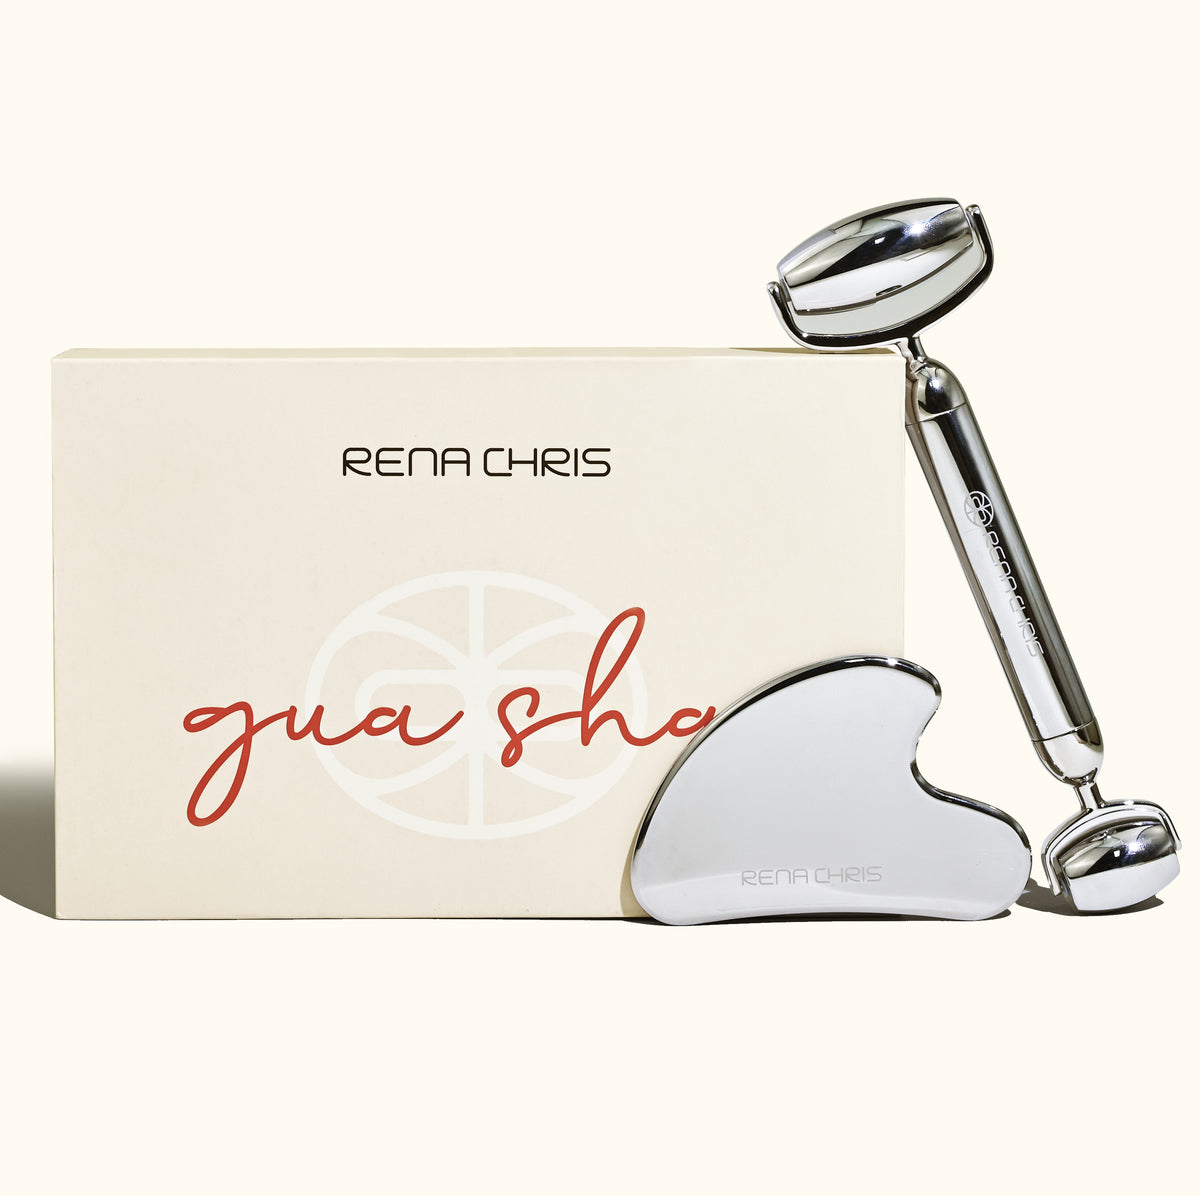 Stainless Steel Face Roller & Gua Sha Set